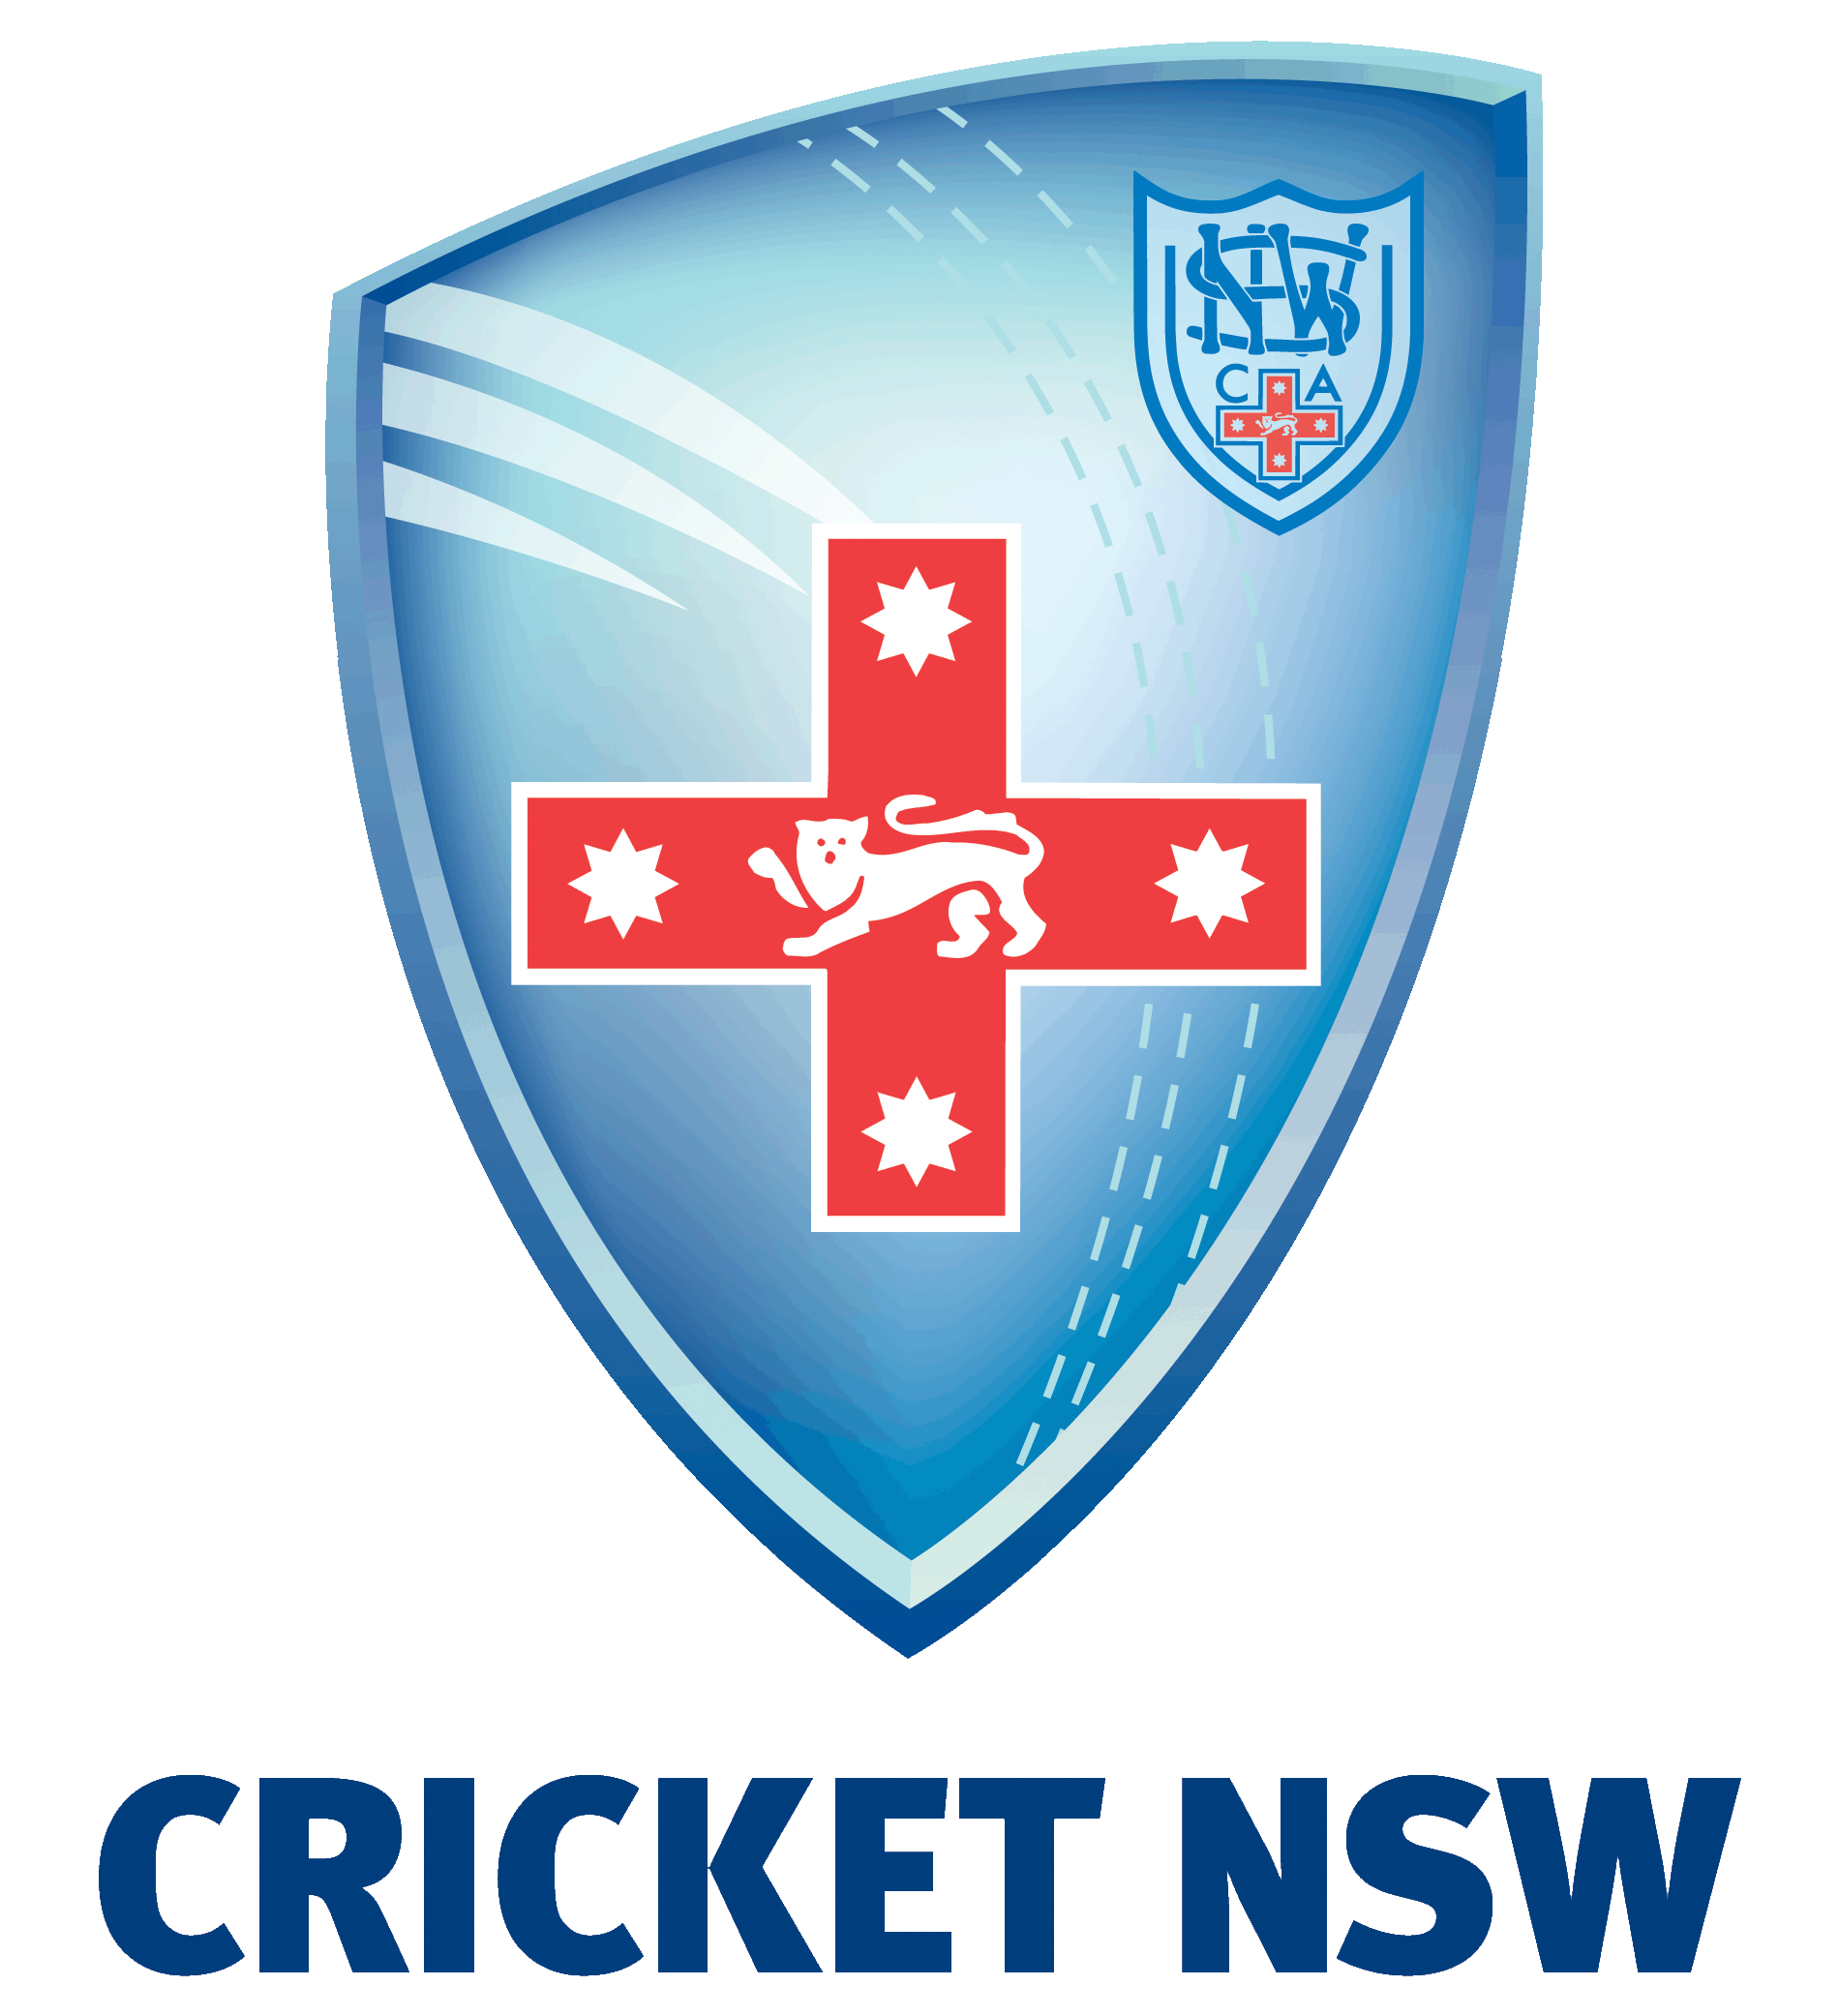 For more information about Cricket NSW, follow this link